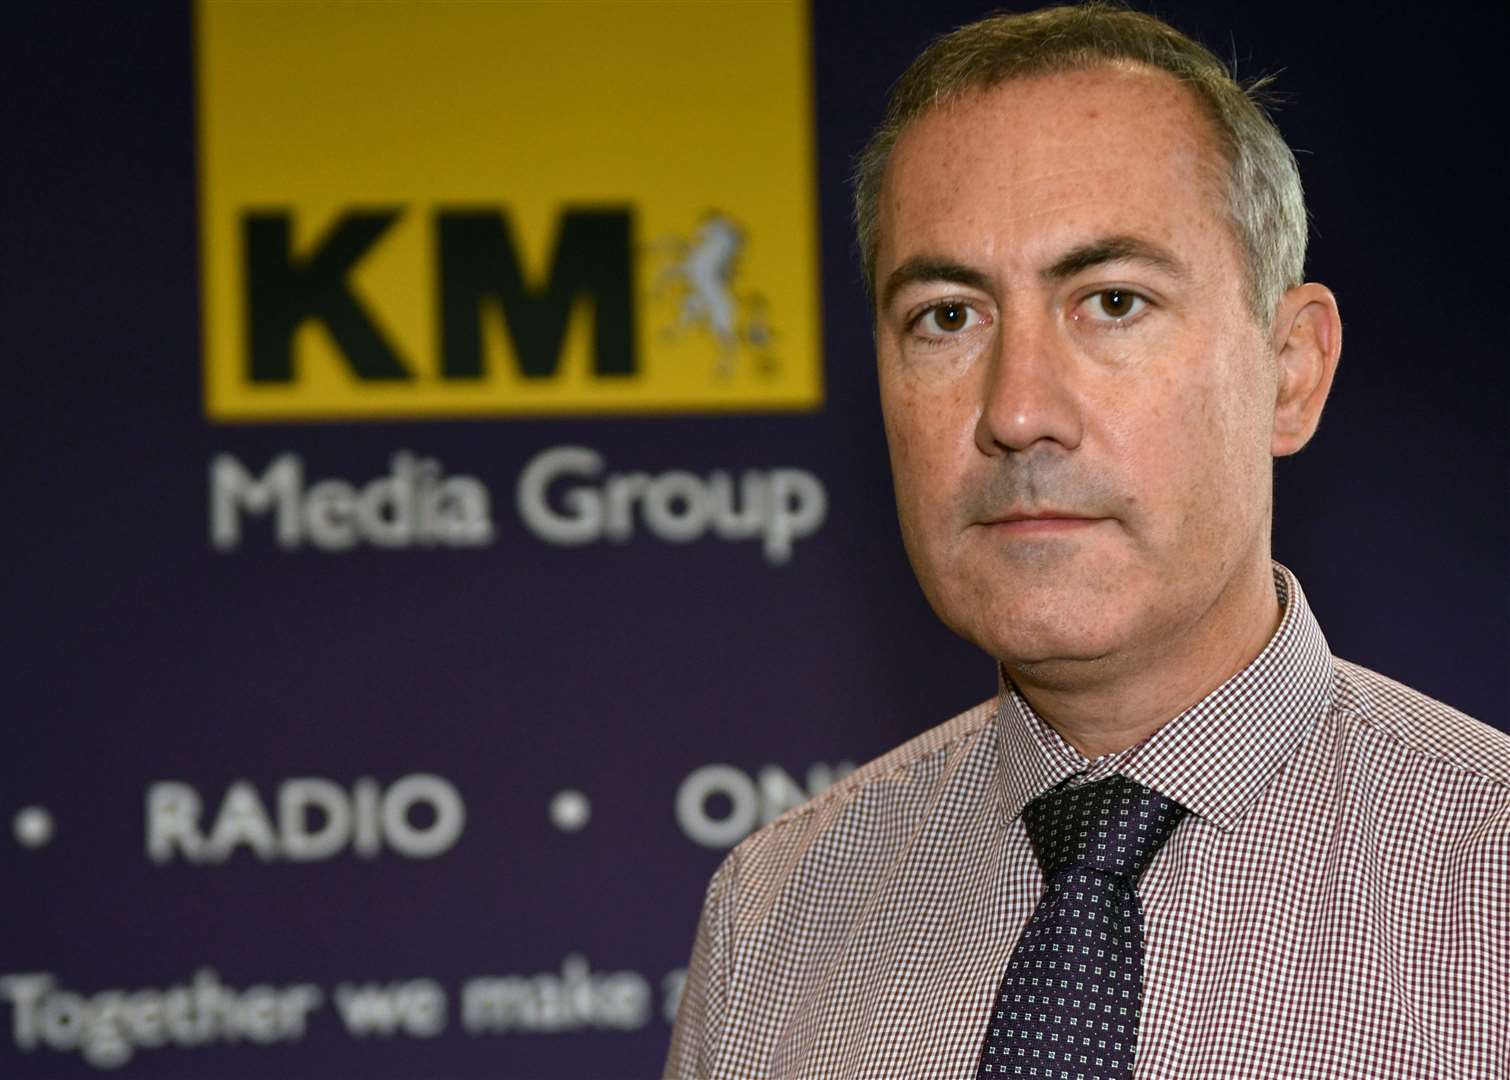 Ian Carter, the editorial director of the KM Media Group